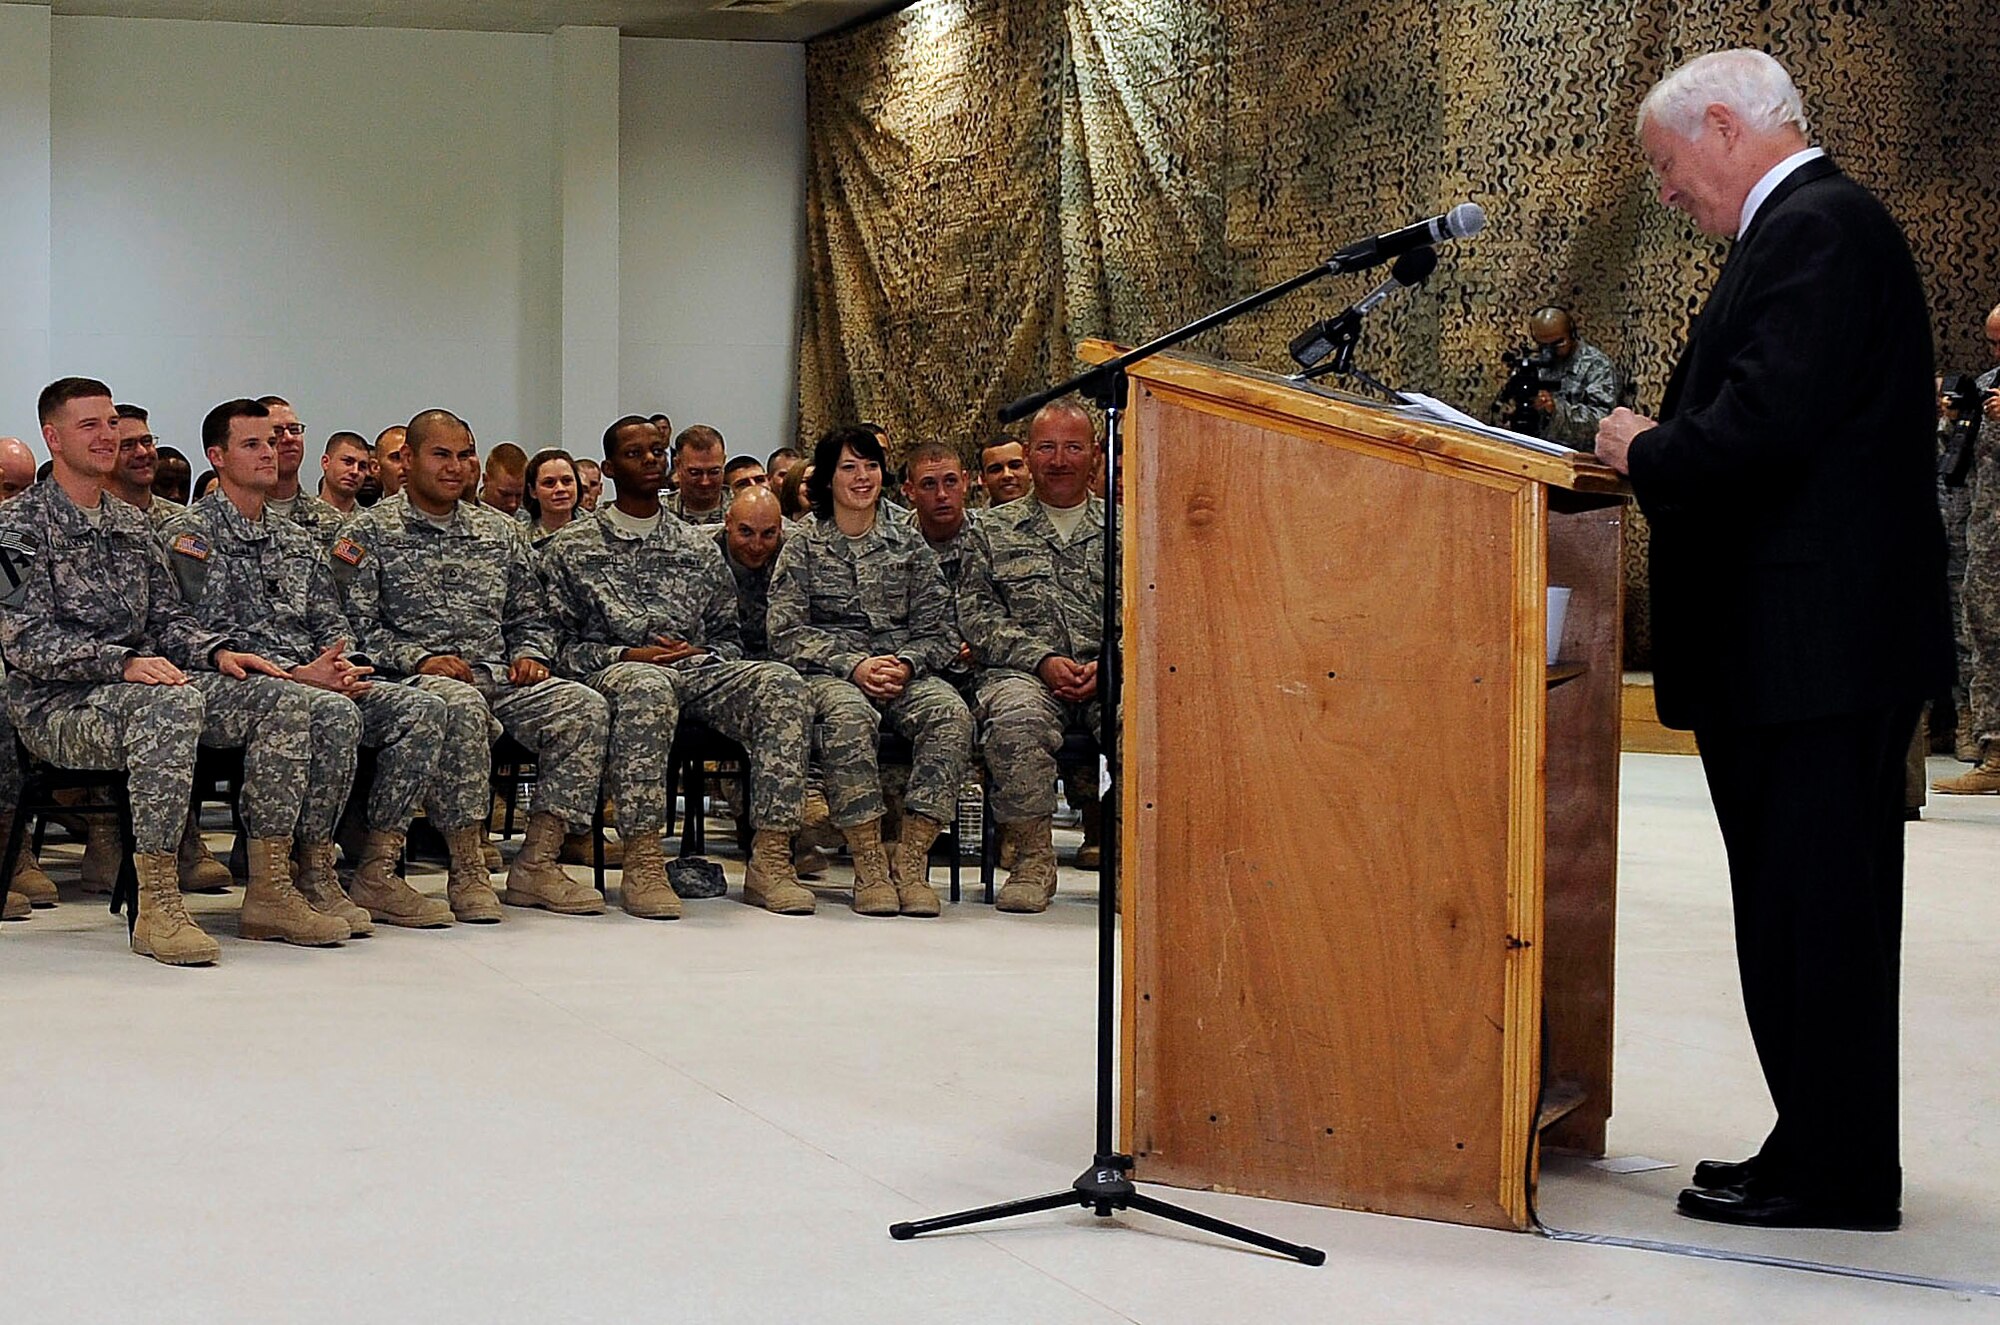 Secretary of Defense Robert Gates holds a town hall meeting with servicemembers at Joint Base Balad, Iraq, Dec. 13. Gates was in Iraq wrapping up a four-day tour of the Middle East meeting with regional commanders and troops. (U.S. Air Force photo/Tech. Sgt. Jerry Morrison)